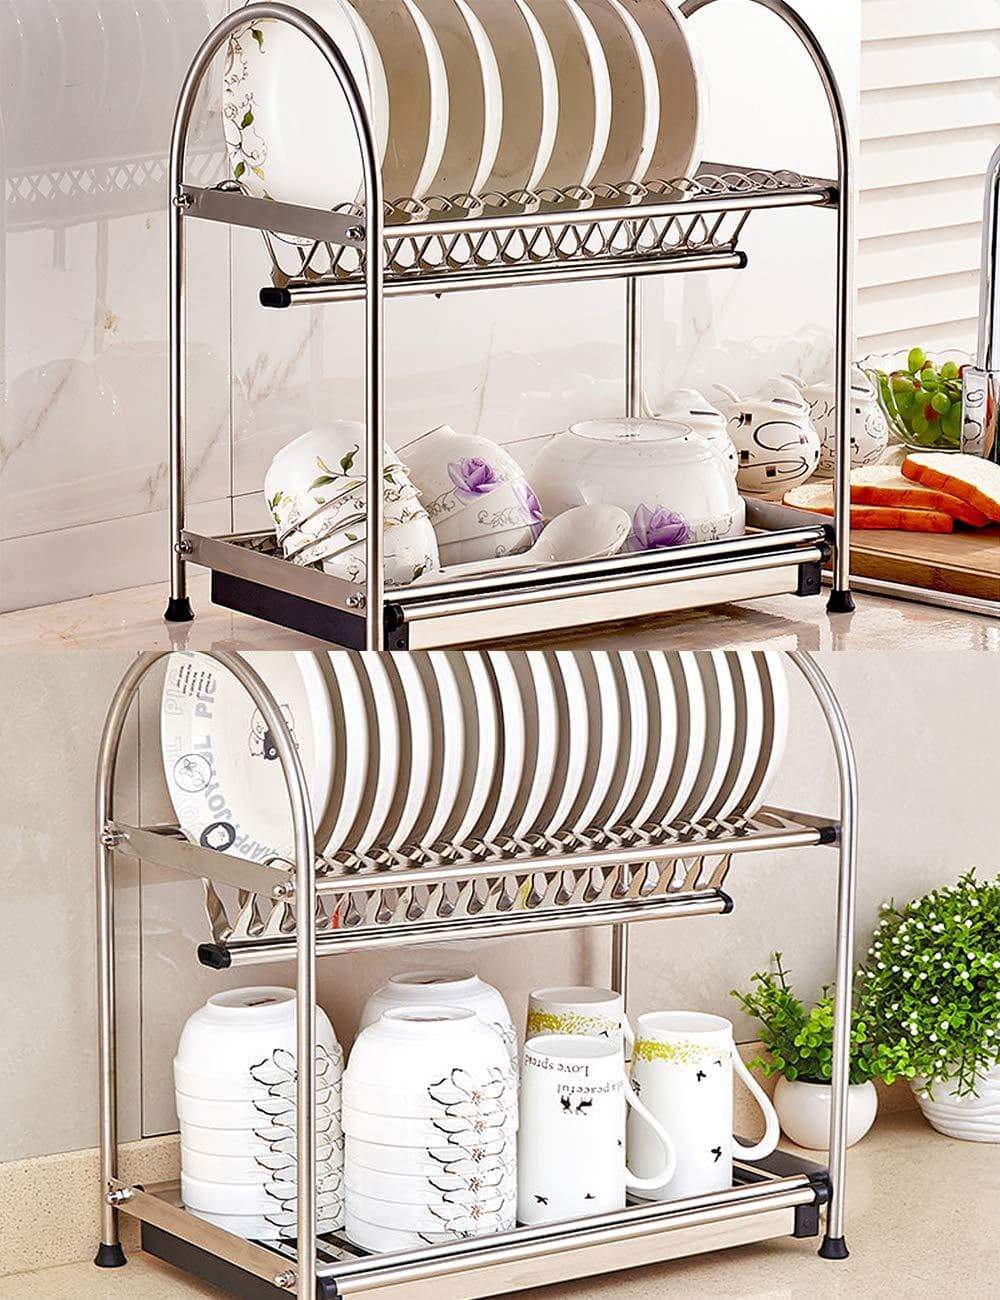 Cheap kitchen hardware collection 2 tier dish drying rack stainless steel stand on countertop draining rack 17 9 inch length 16 dish slots organizer with drainboard for cup plate bowl